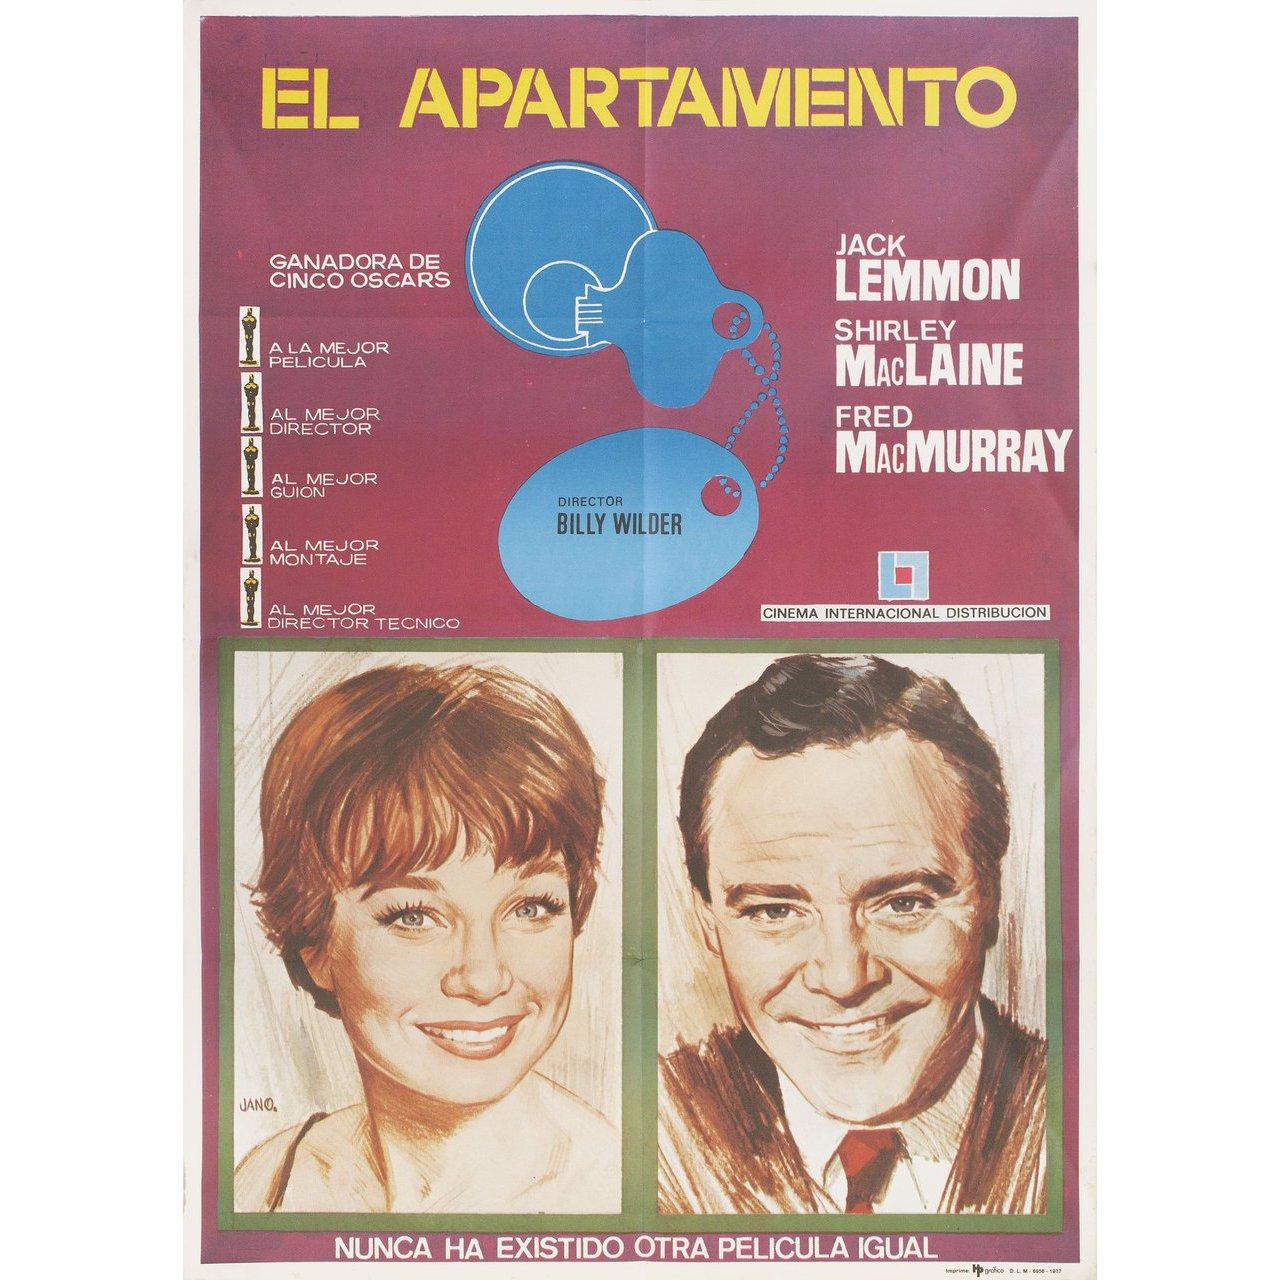 Original 1977 re-release Spanish B1 poster by Jano for the 1960 film The Apartment directed by Billy Wilder with Jack Lemmon / Shirley MacLaine / Fred MacMurray / Ray Walston. Very Good-Fine condition, folded. Many original posters were issued